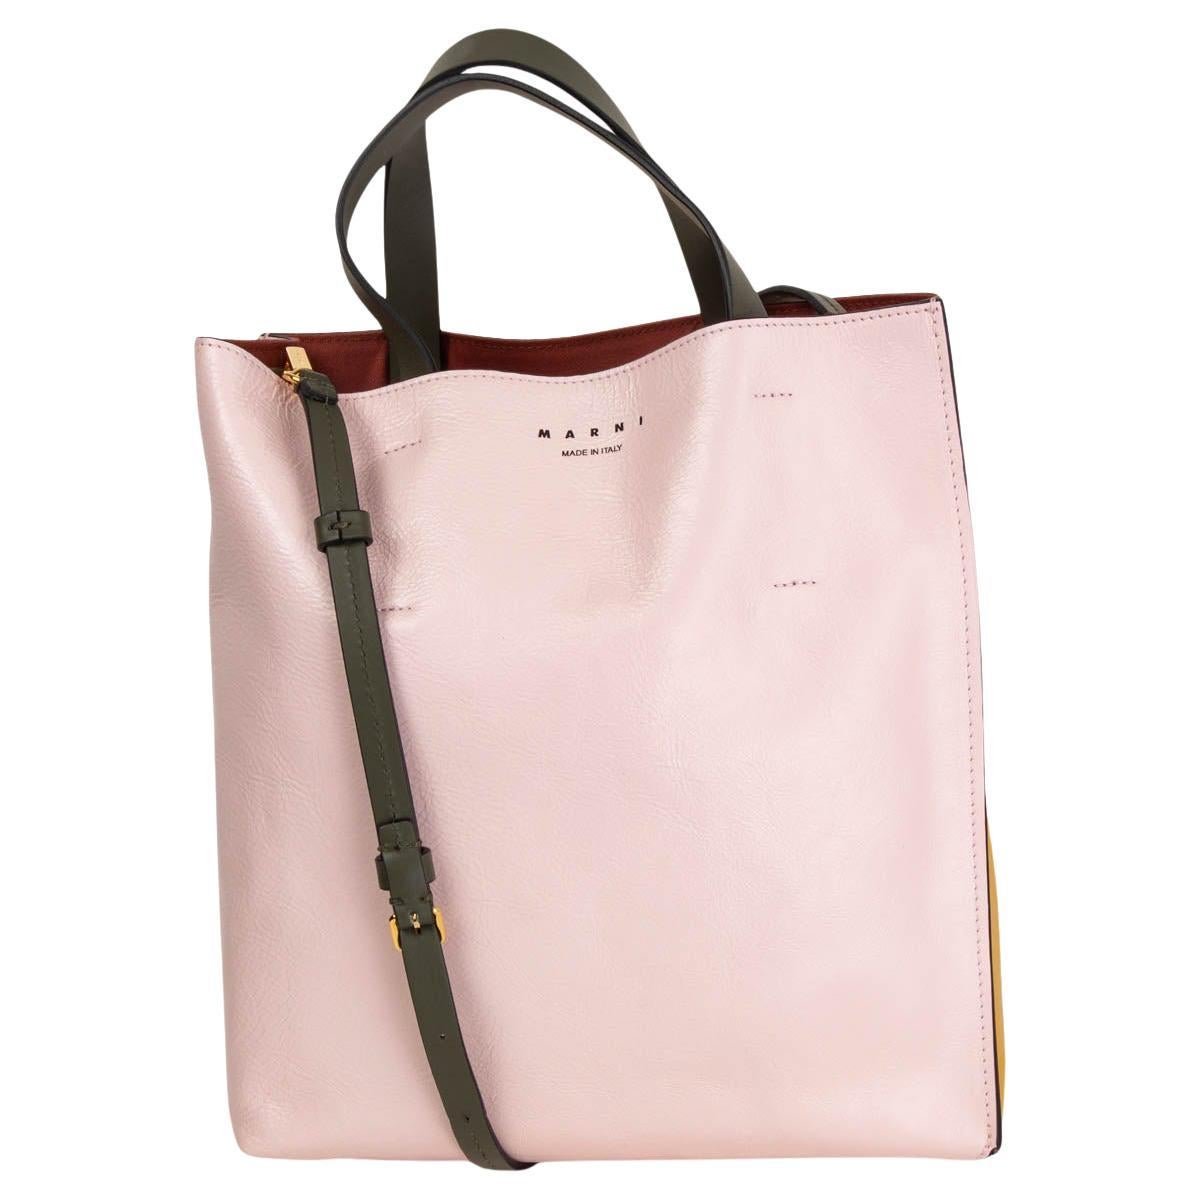 MARNI pink yellow green leather TRICOLOR MUSEO SMALL TOTE Bag at